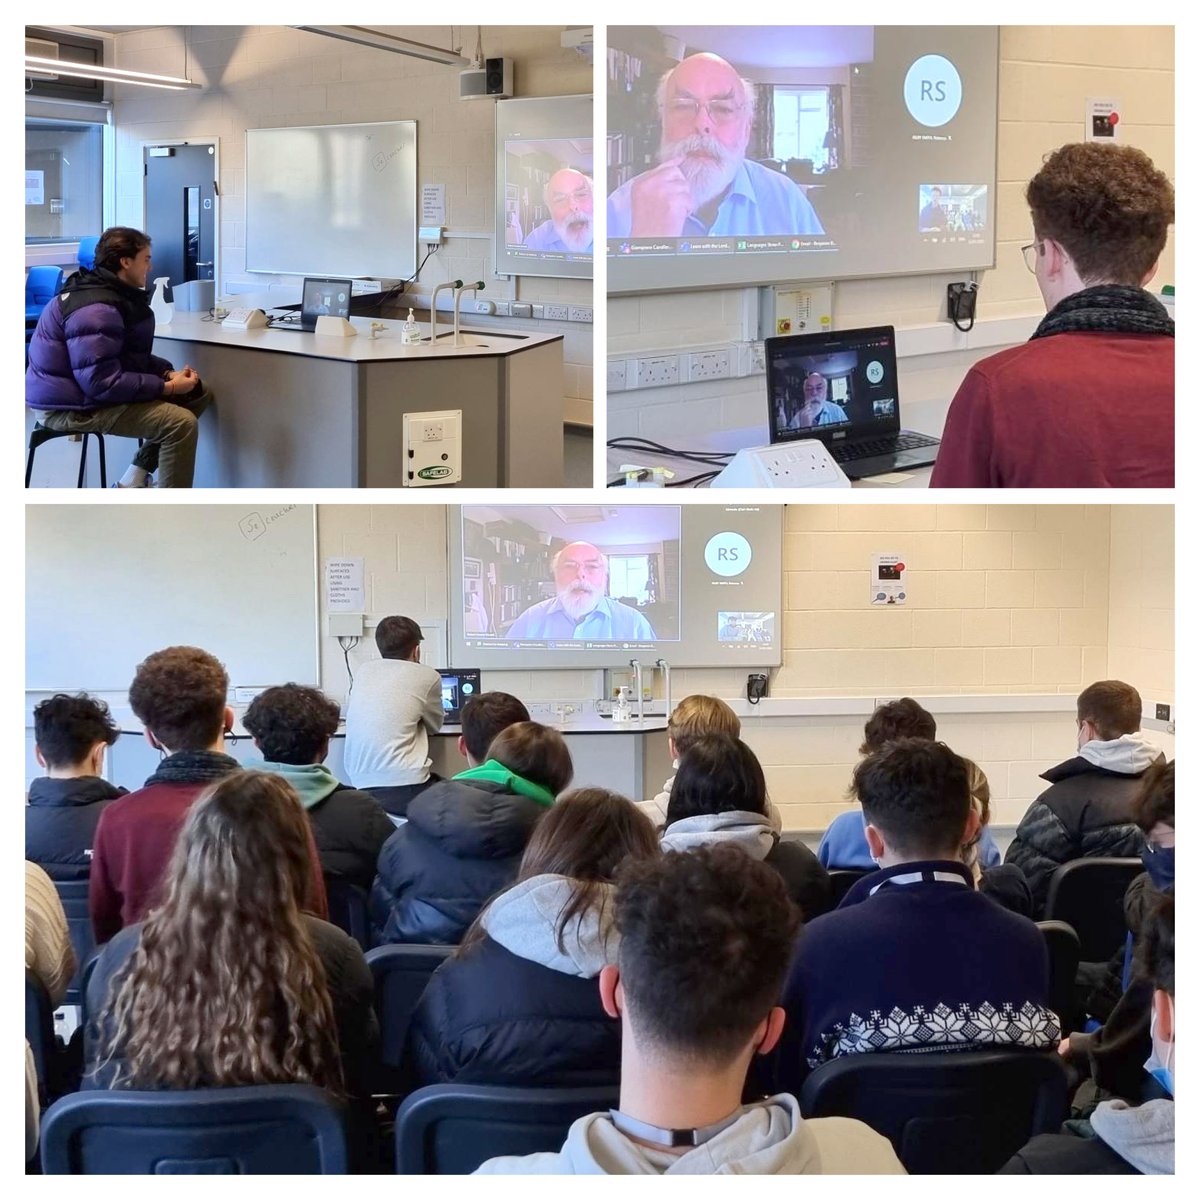 Today, Year 12 Politics students had the fantastic opportunity to participate in ‘Learn with the Lords’, where they were able to put their most pressing questions to Life Peer, Lord Lisvane. No stone was left unturned, and we are tremendously grateful for his time.